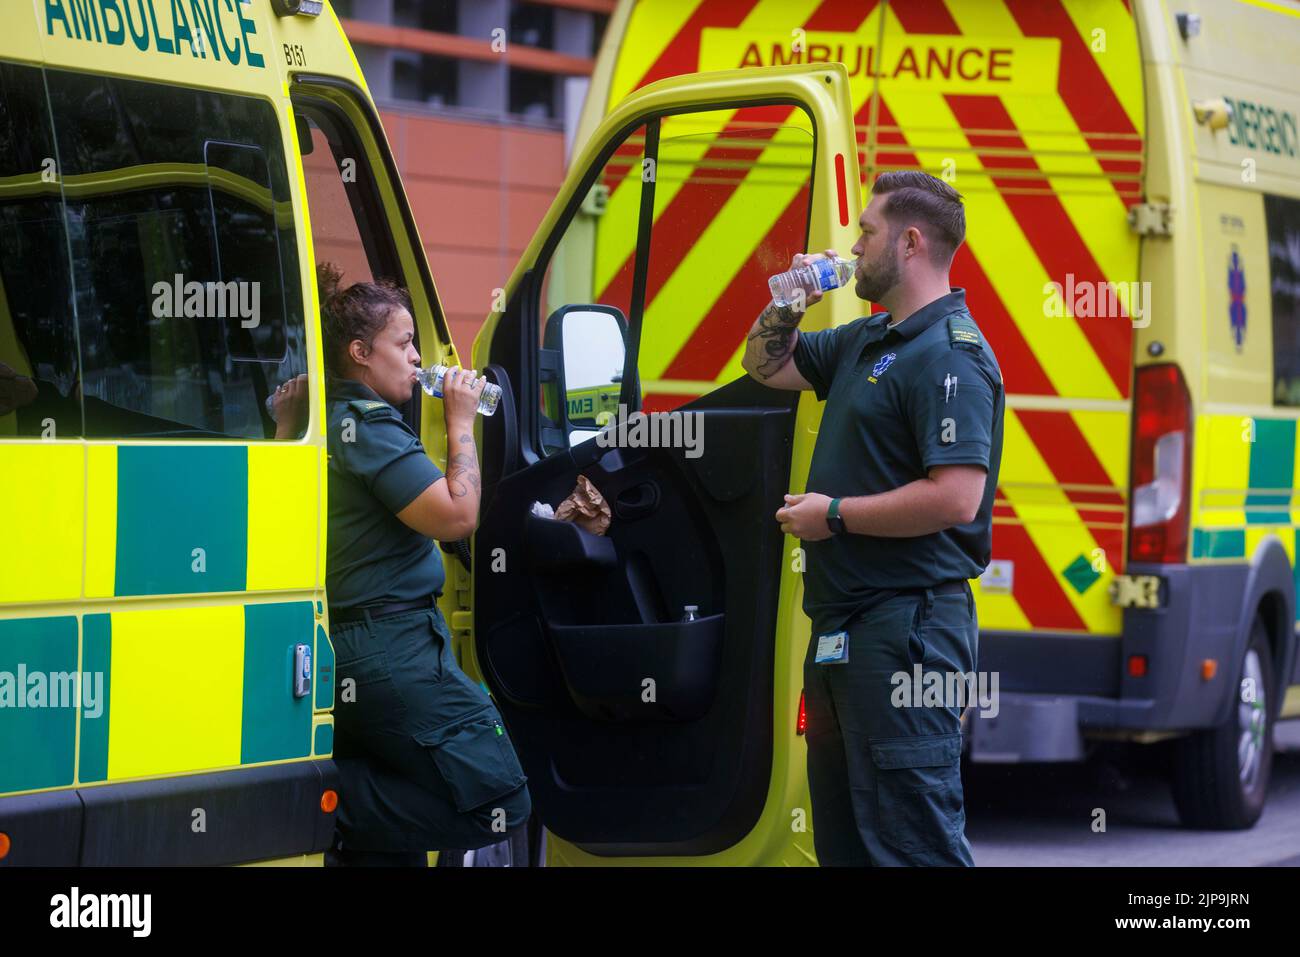 Two ambulance workers take a break during a shift during the hot summer weather. The ambulance service is under pressure with increased workload. Stock Photo